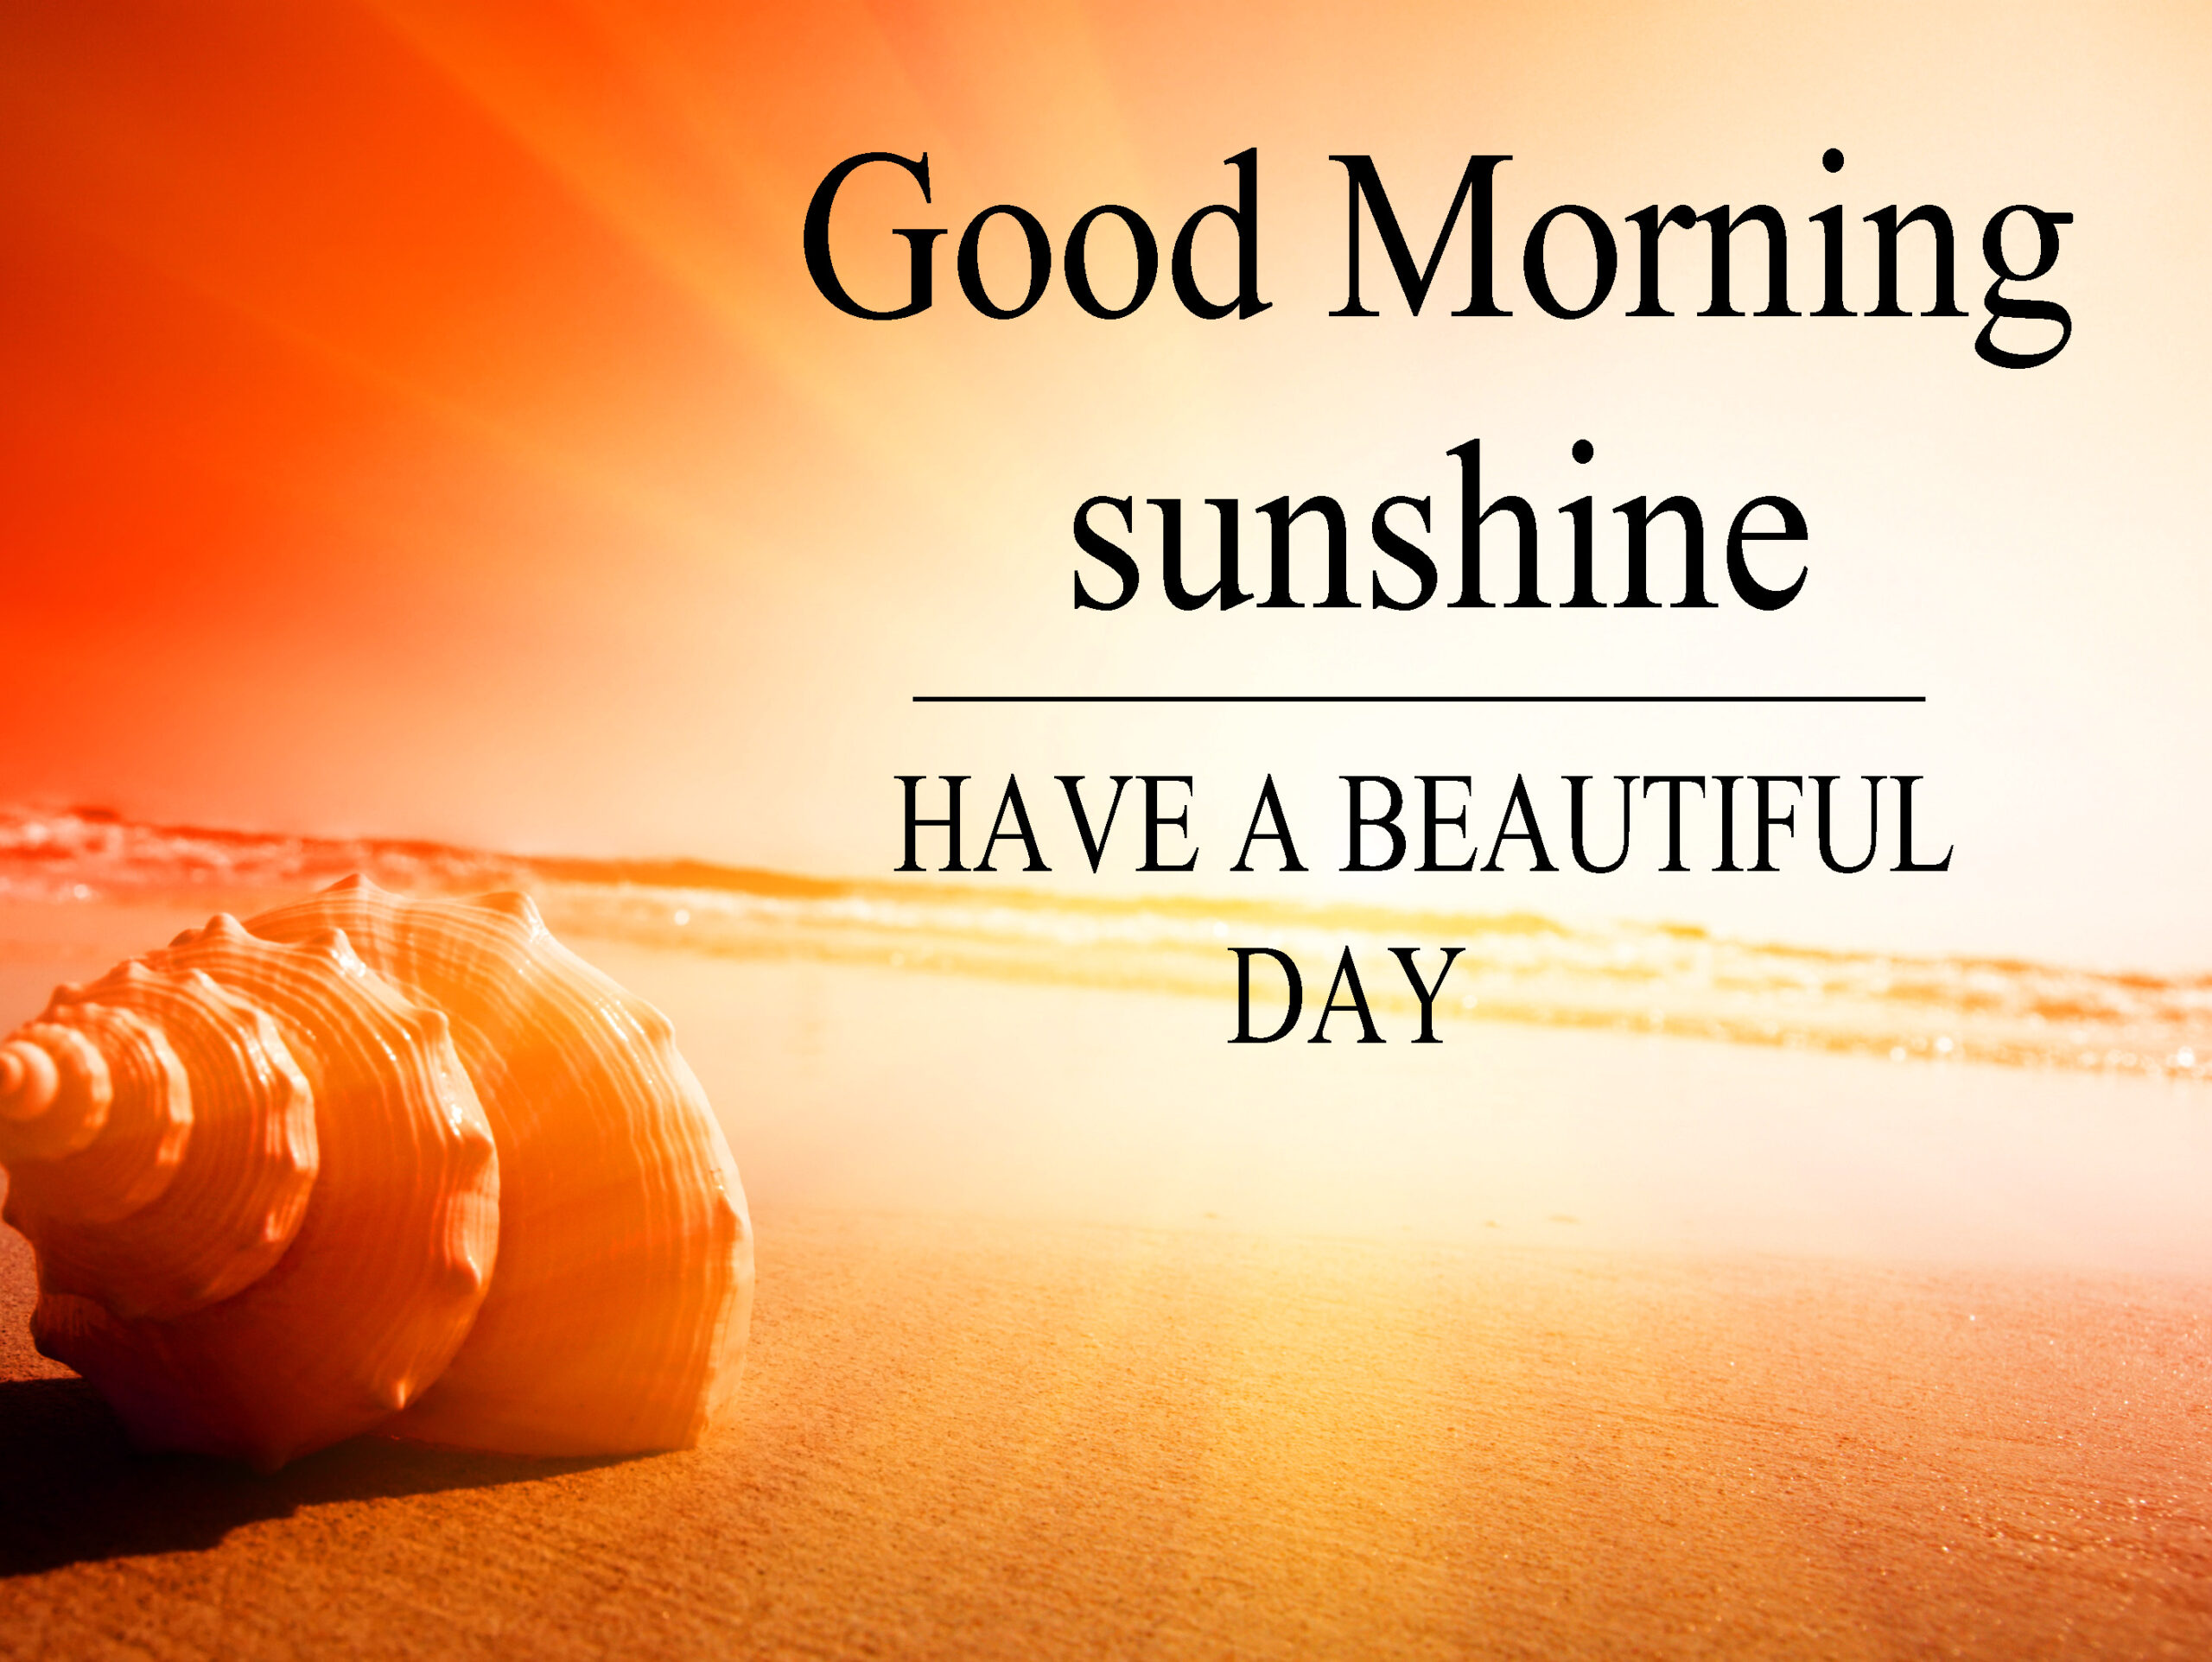 Good Morning Sunshine Quotes will help them to get a motivational start